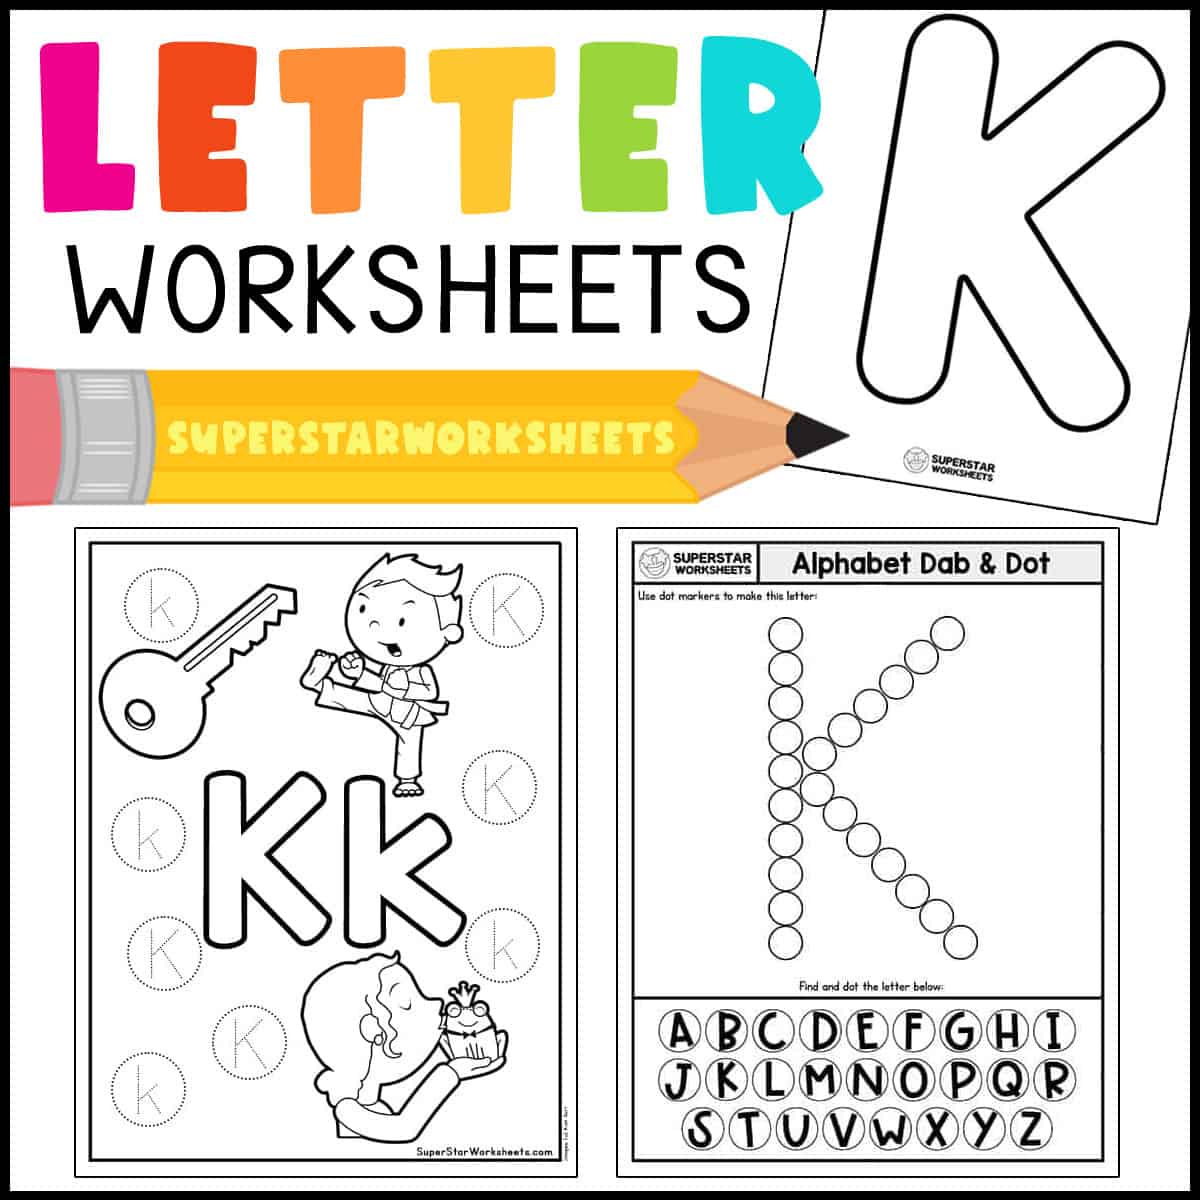 Alphabet Letters Worksheets For Toddlers